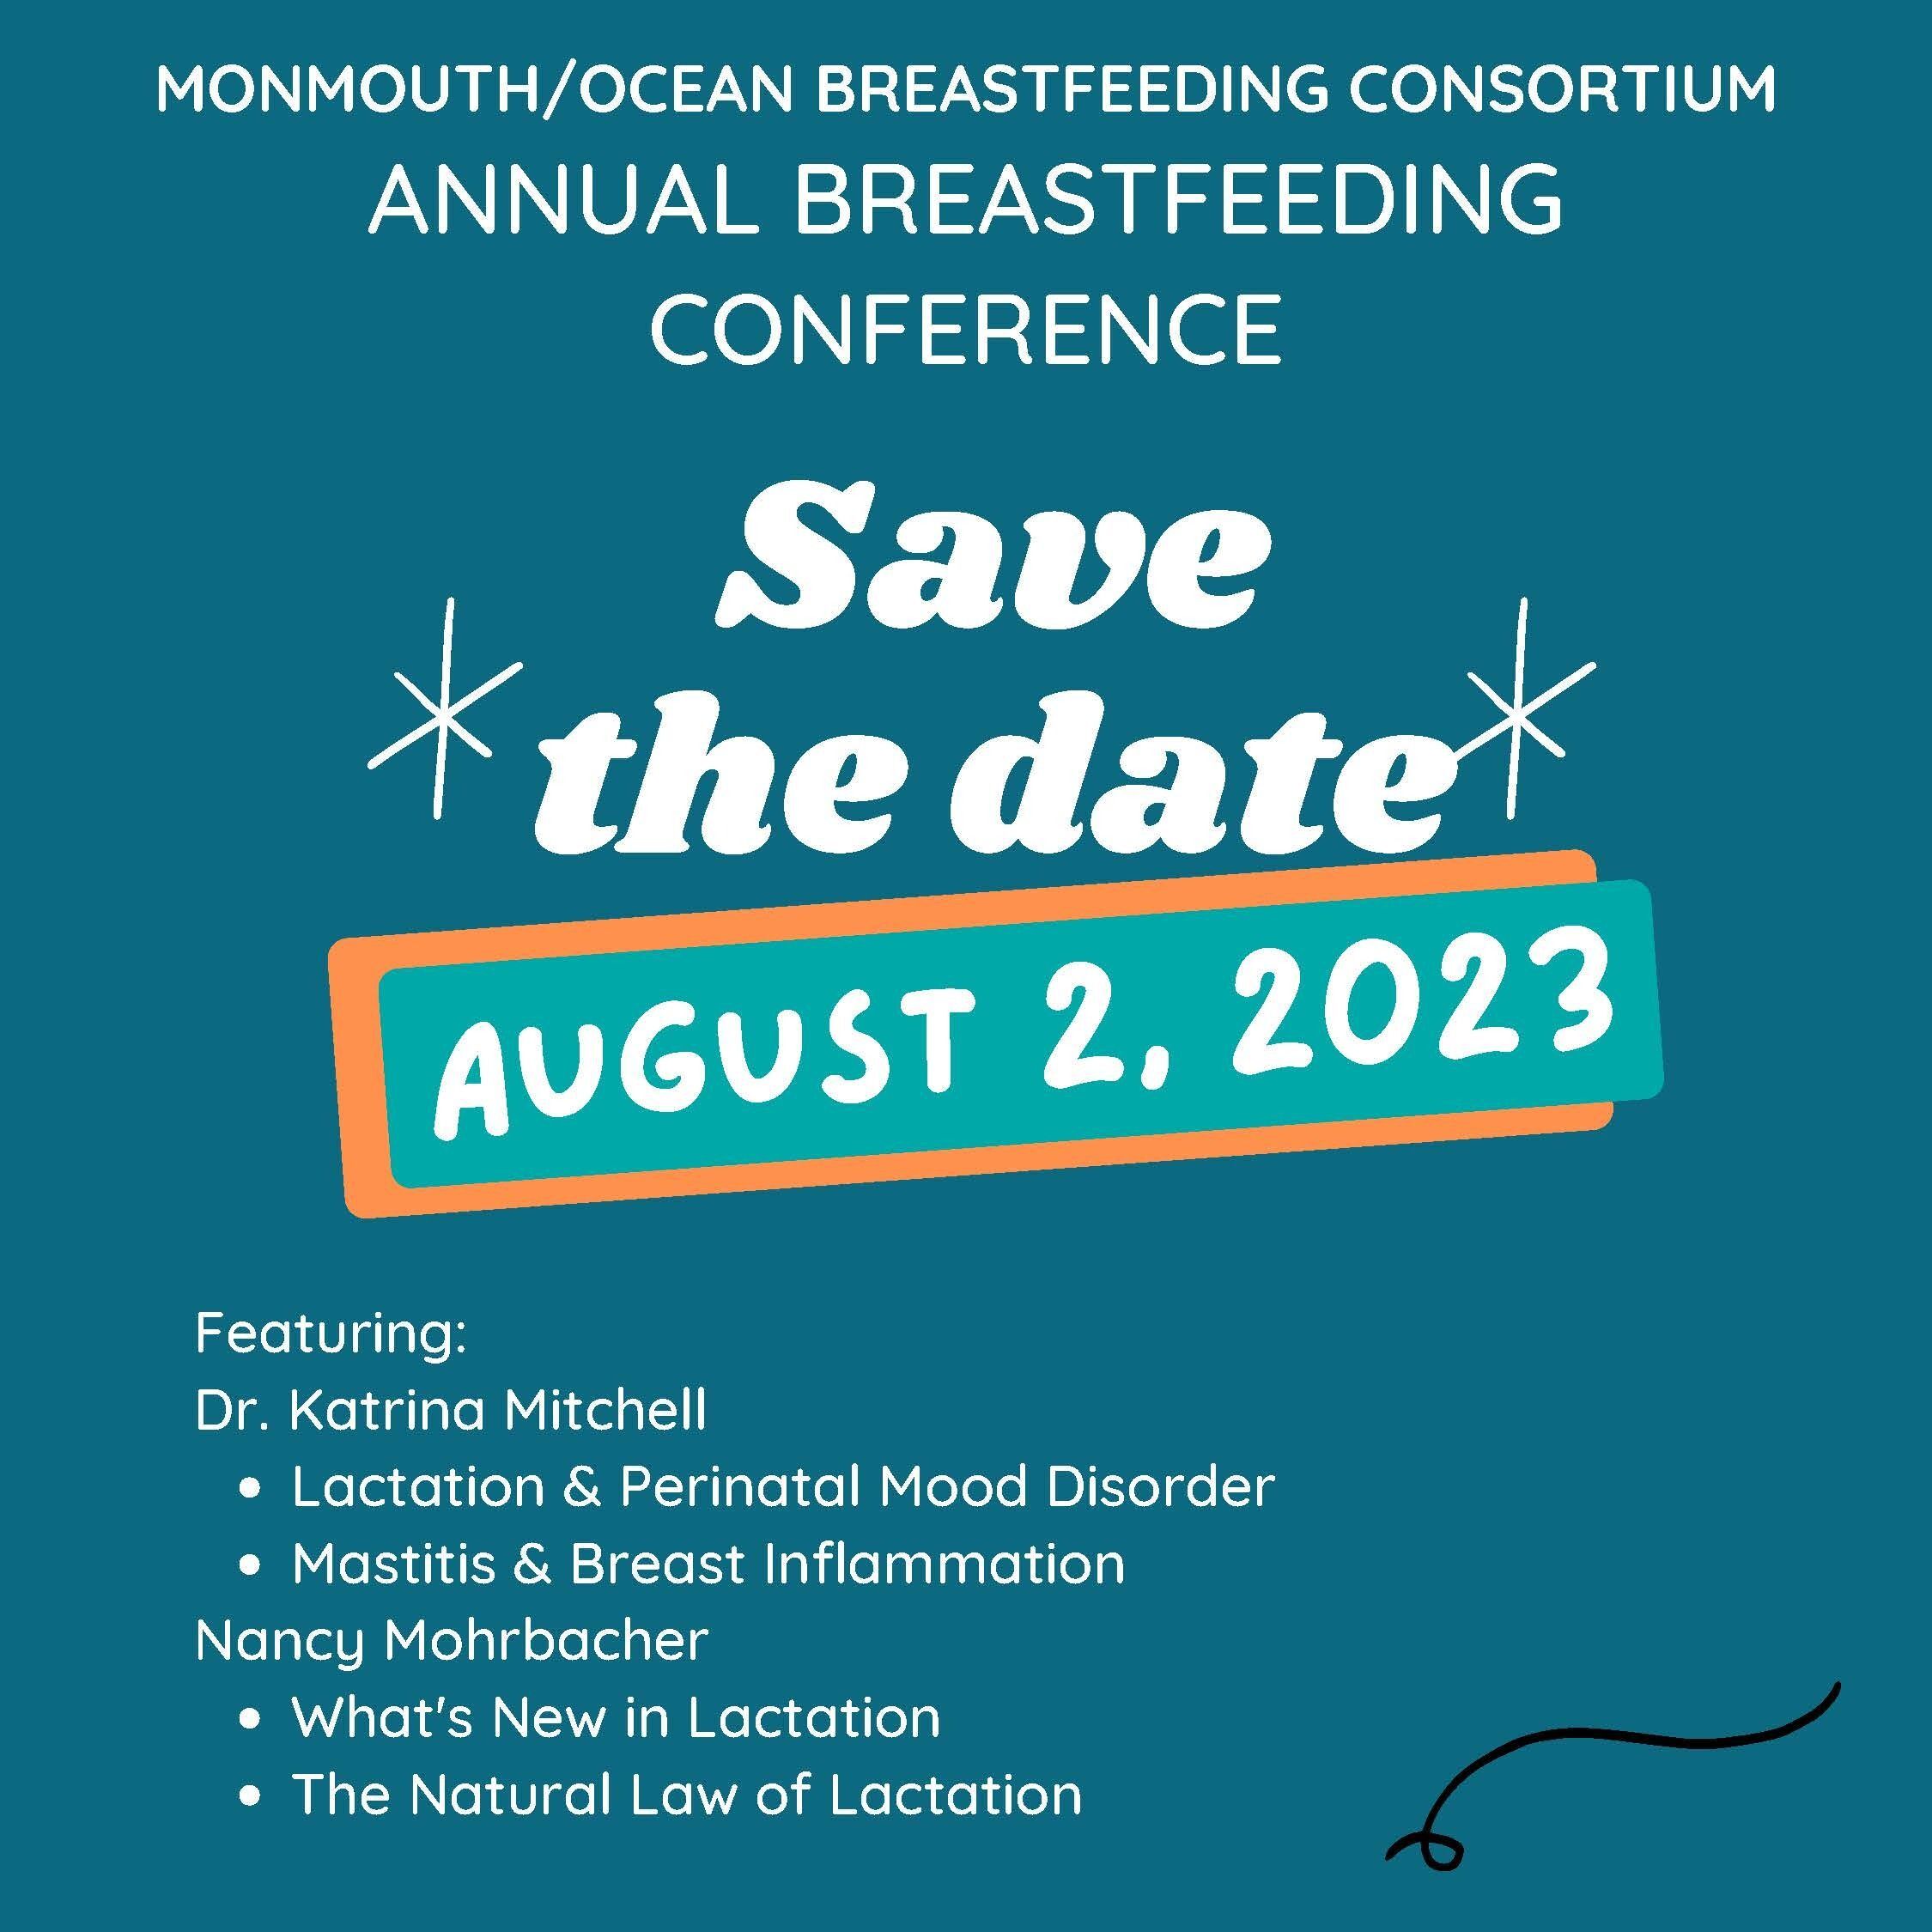 Annual Breastfeeding Conference!  Save the Date - August 2, 2023